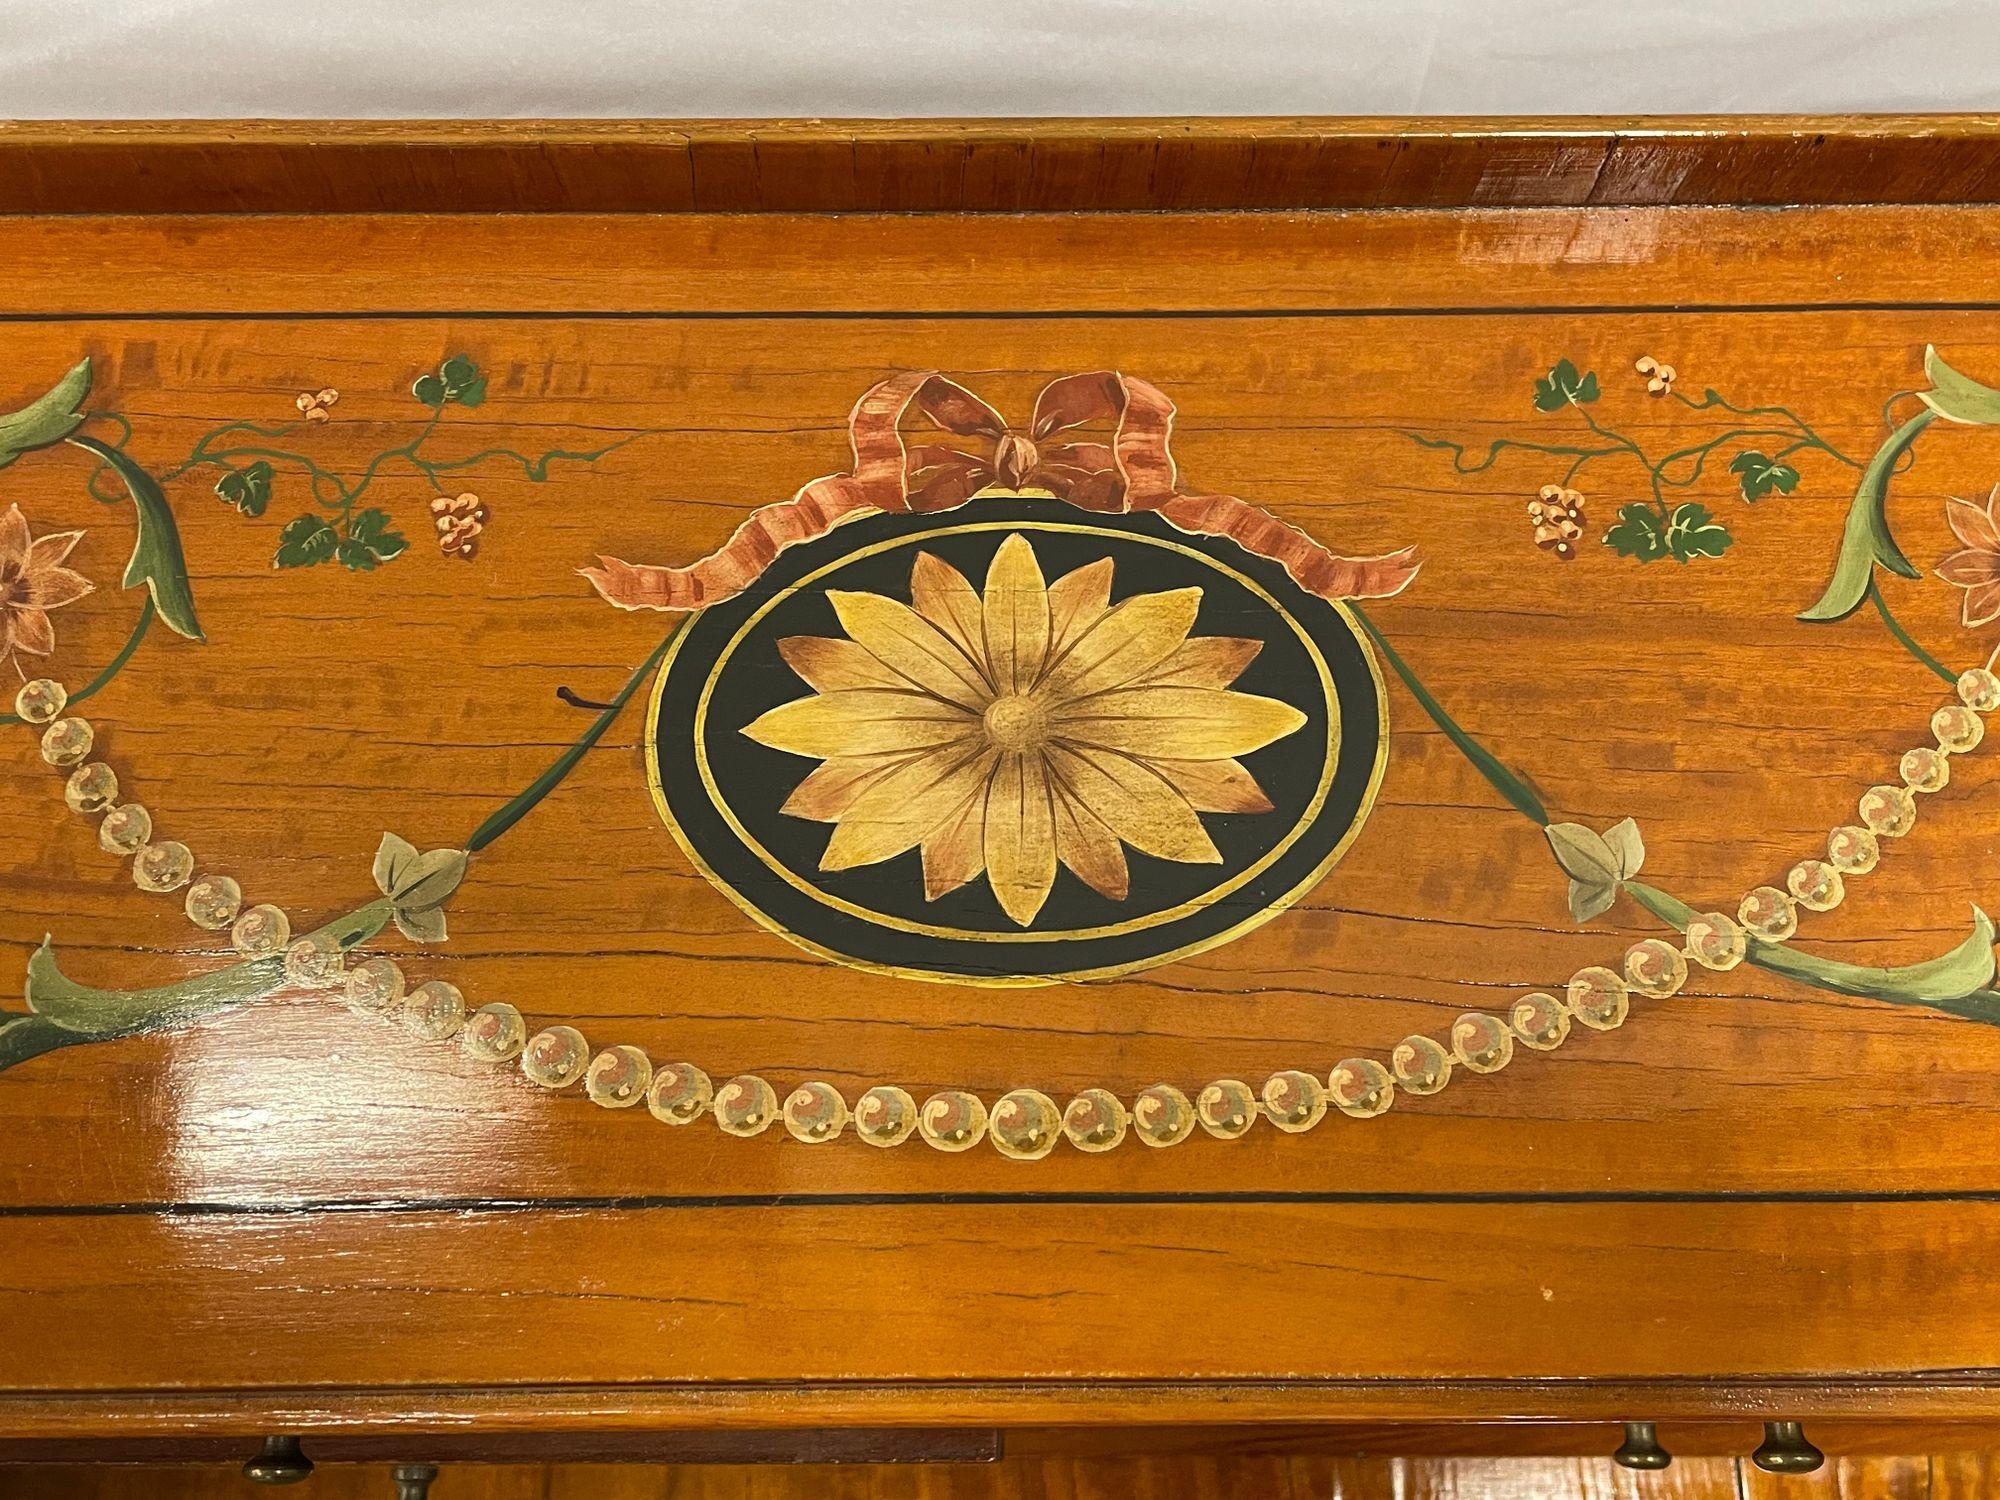 Adams Edwardian Inlaid Carlton House Desk, Hand Painted, Angela Kauffman In Good Condition For Sale In Stamford, CT